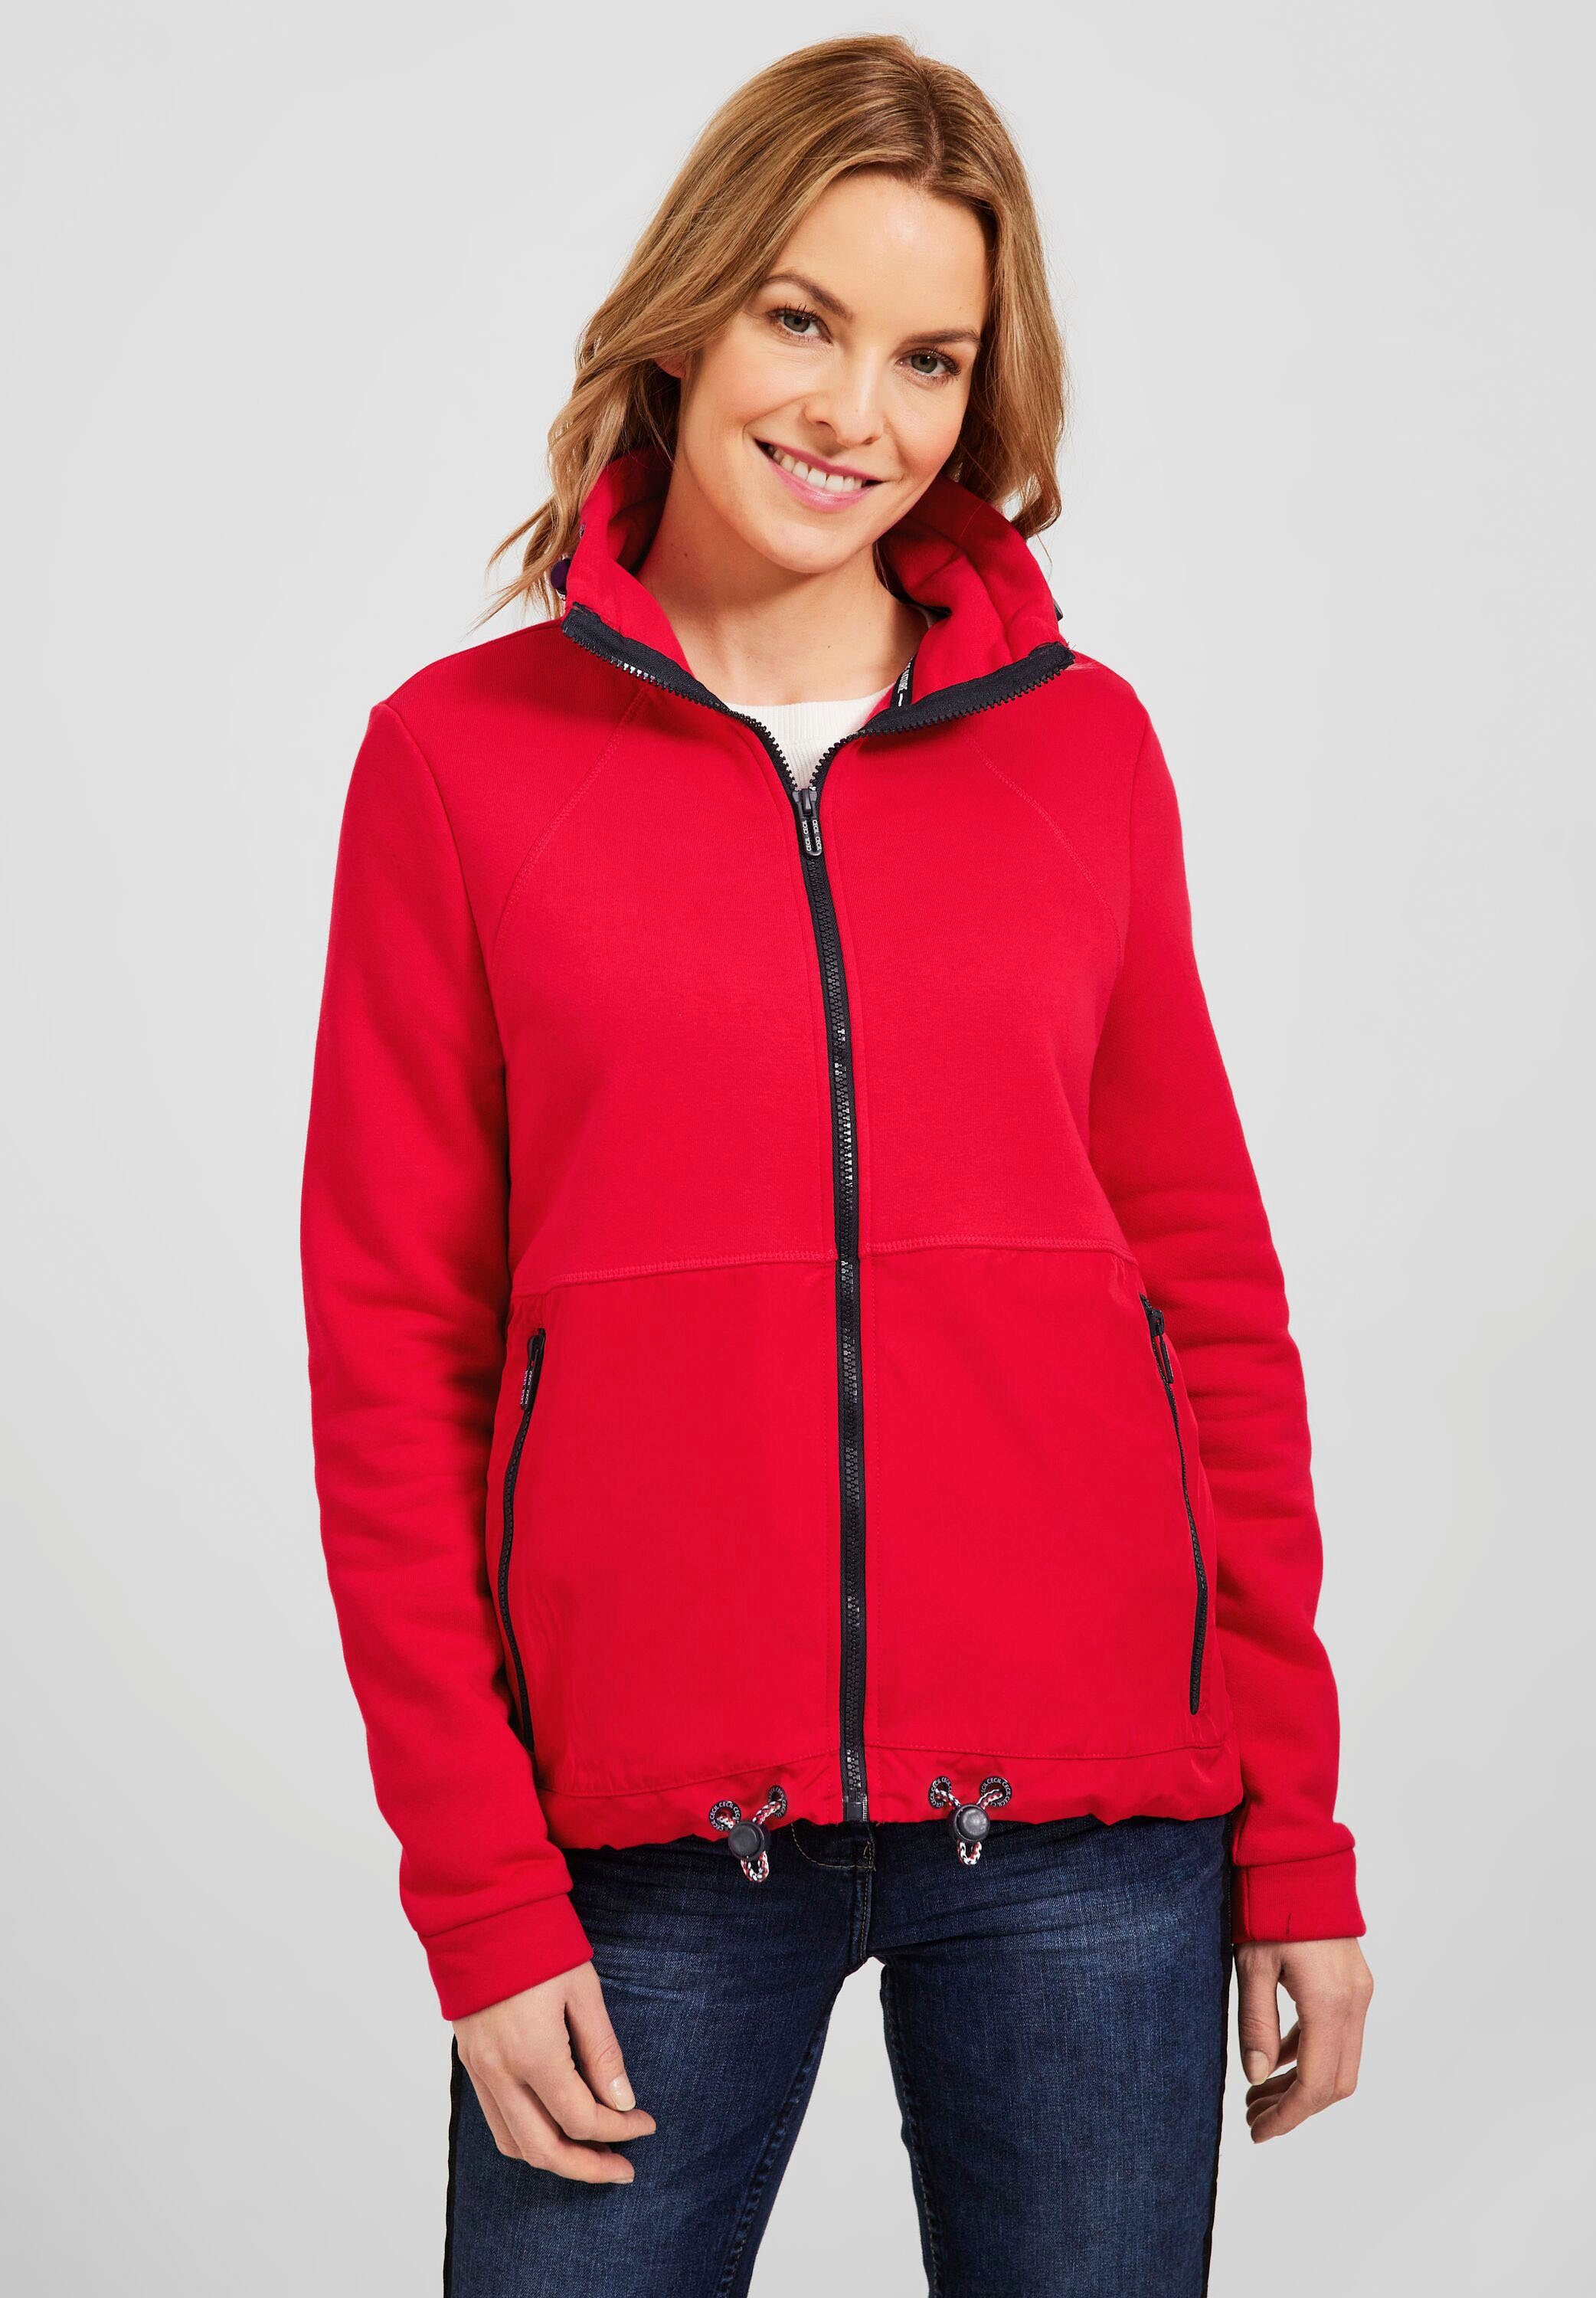 red strong im Materialmix modernen Sweatjacke Cecil